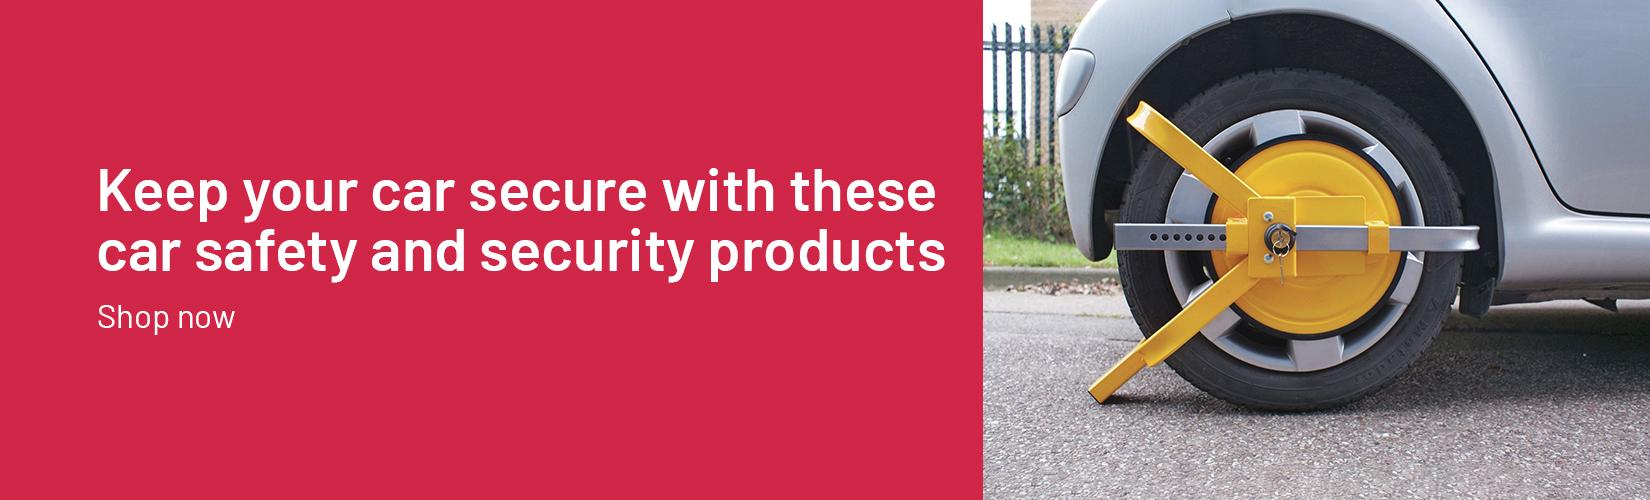 Keep your car secure with these car safety & security products. Shop now.